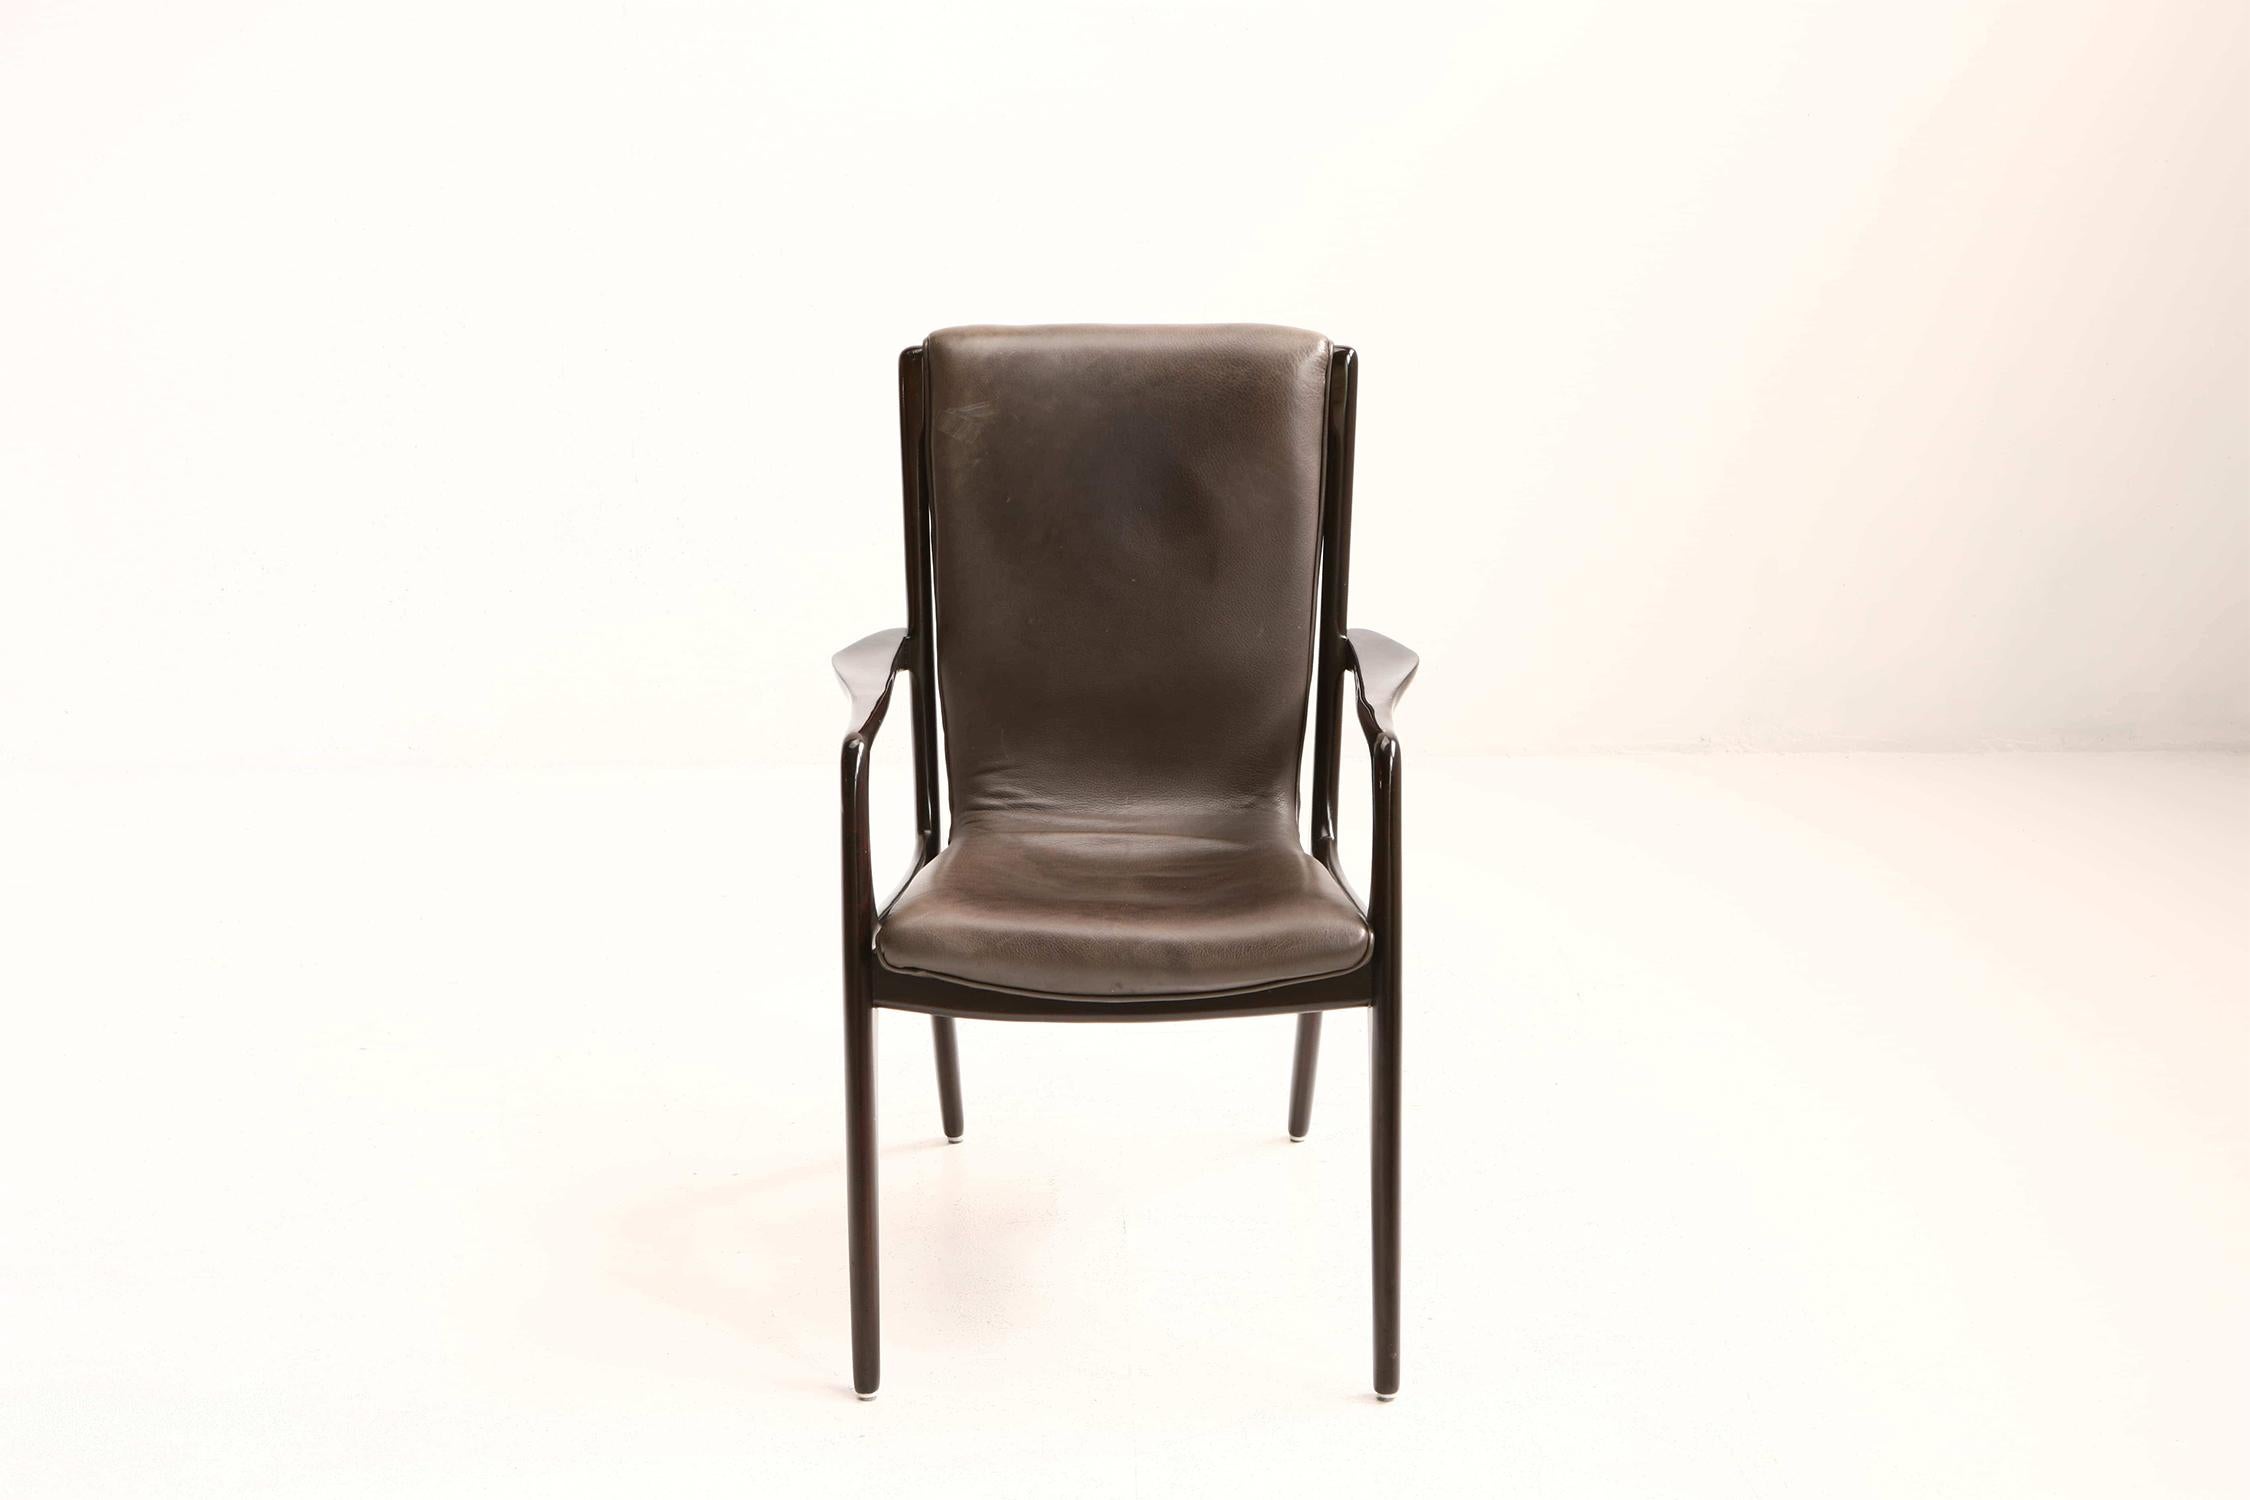 Set of 4 Midcentury Vladimir Kagan Sculpted Sling Dining Chairs Model VK 101A For Sale 3